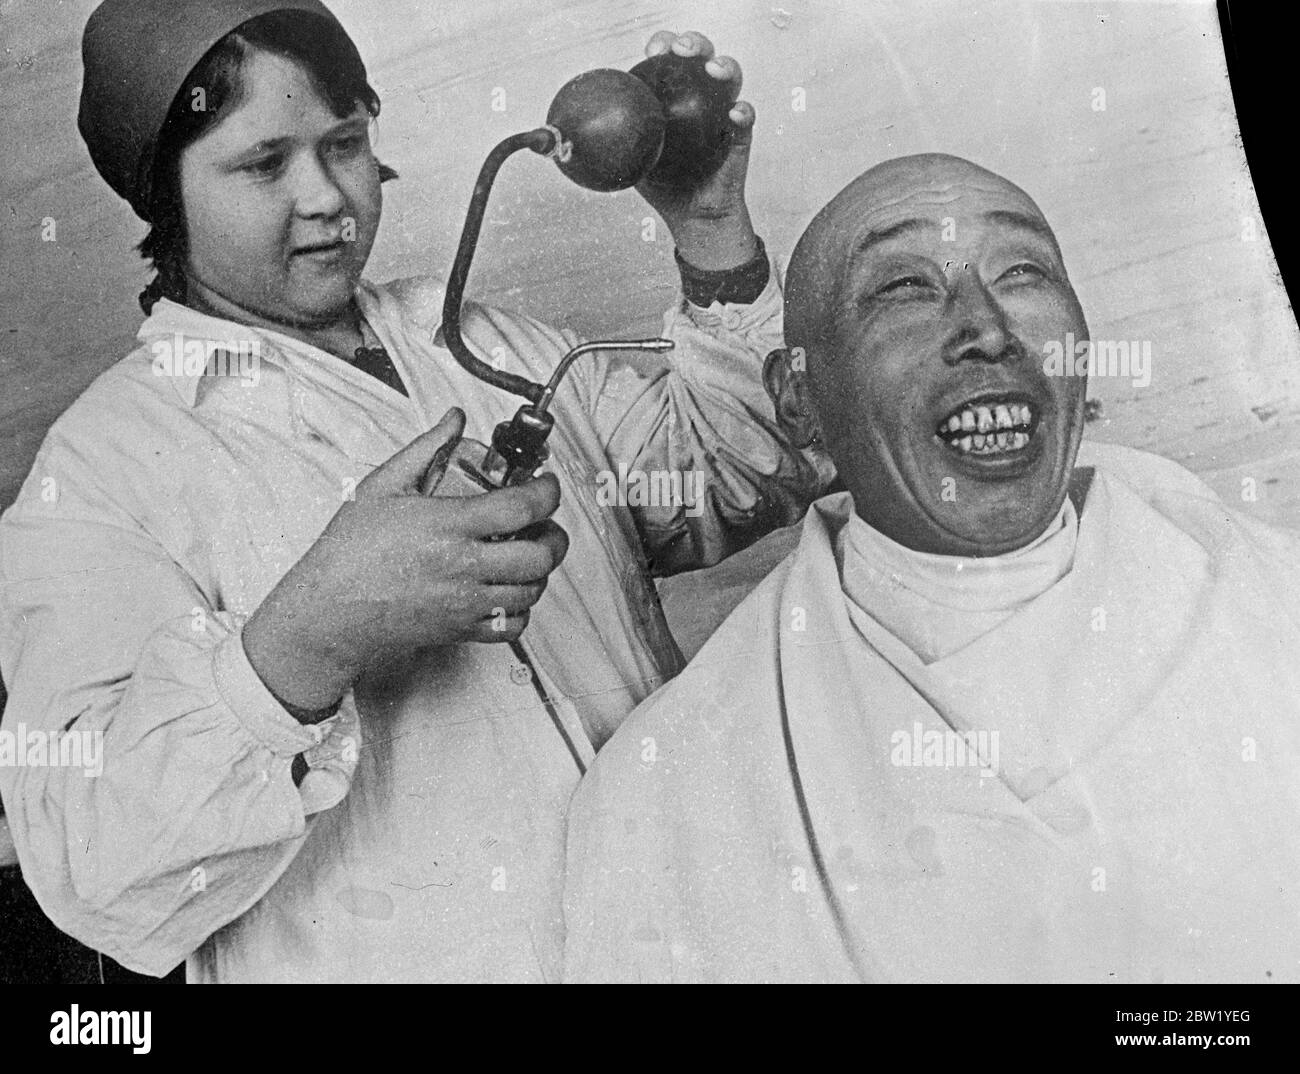 Original caption: He likes the spray! Oriental impassiveness gave place to a broad smile of delight as the woman barber scent sprayed her Chinese customer in a shop at the Svetly gold field in the Lena River district of Eastern Siberia, USSR. This miner is one of the many Chinese working in the Lena goldfields. Stock Photo